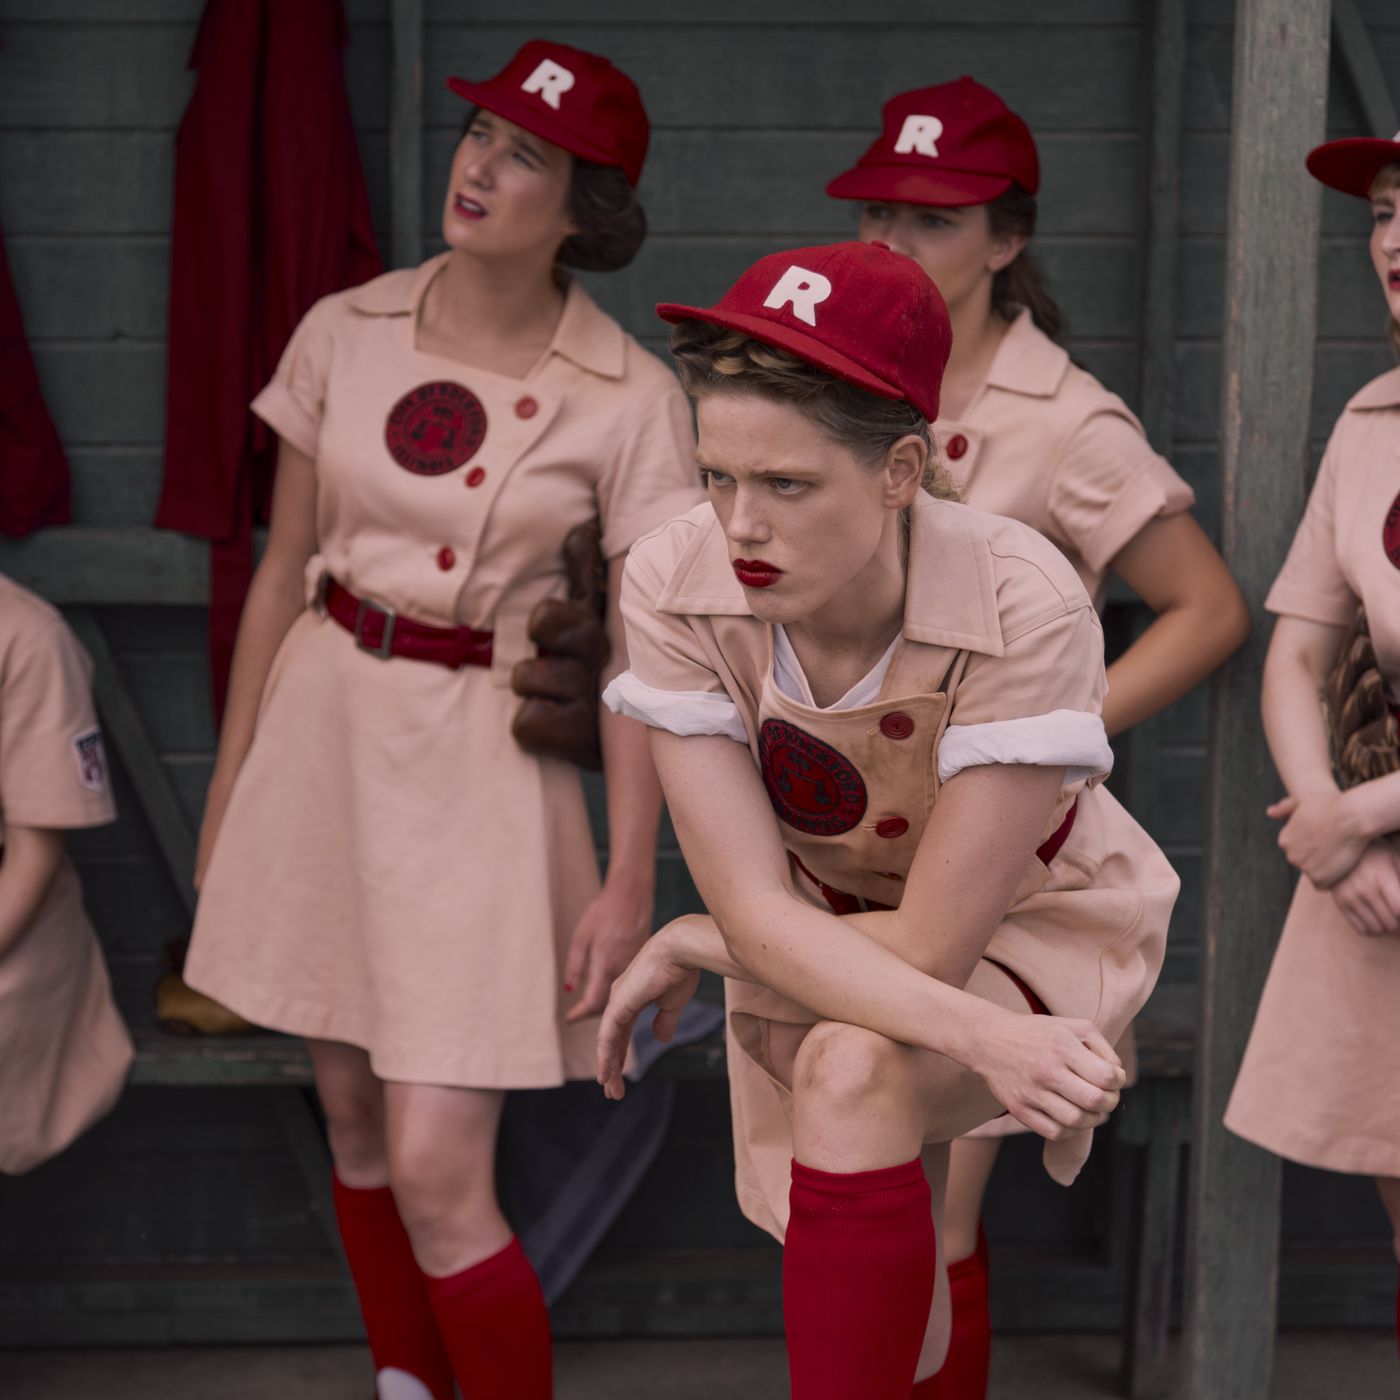 A League of Their Own 2022: Amazon Prime's remake honors the original - Vox